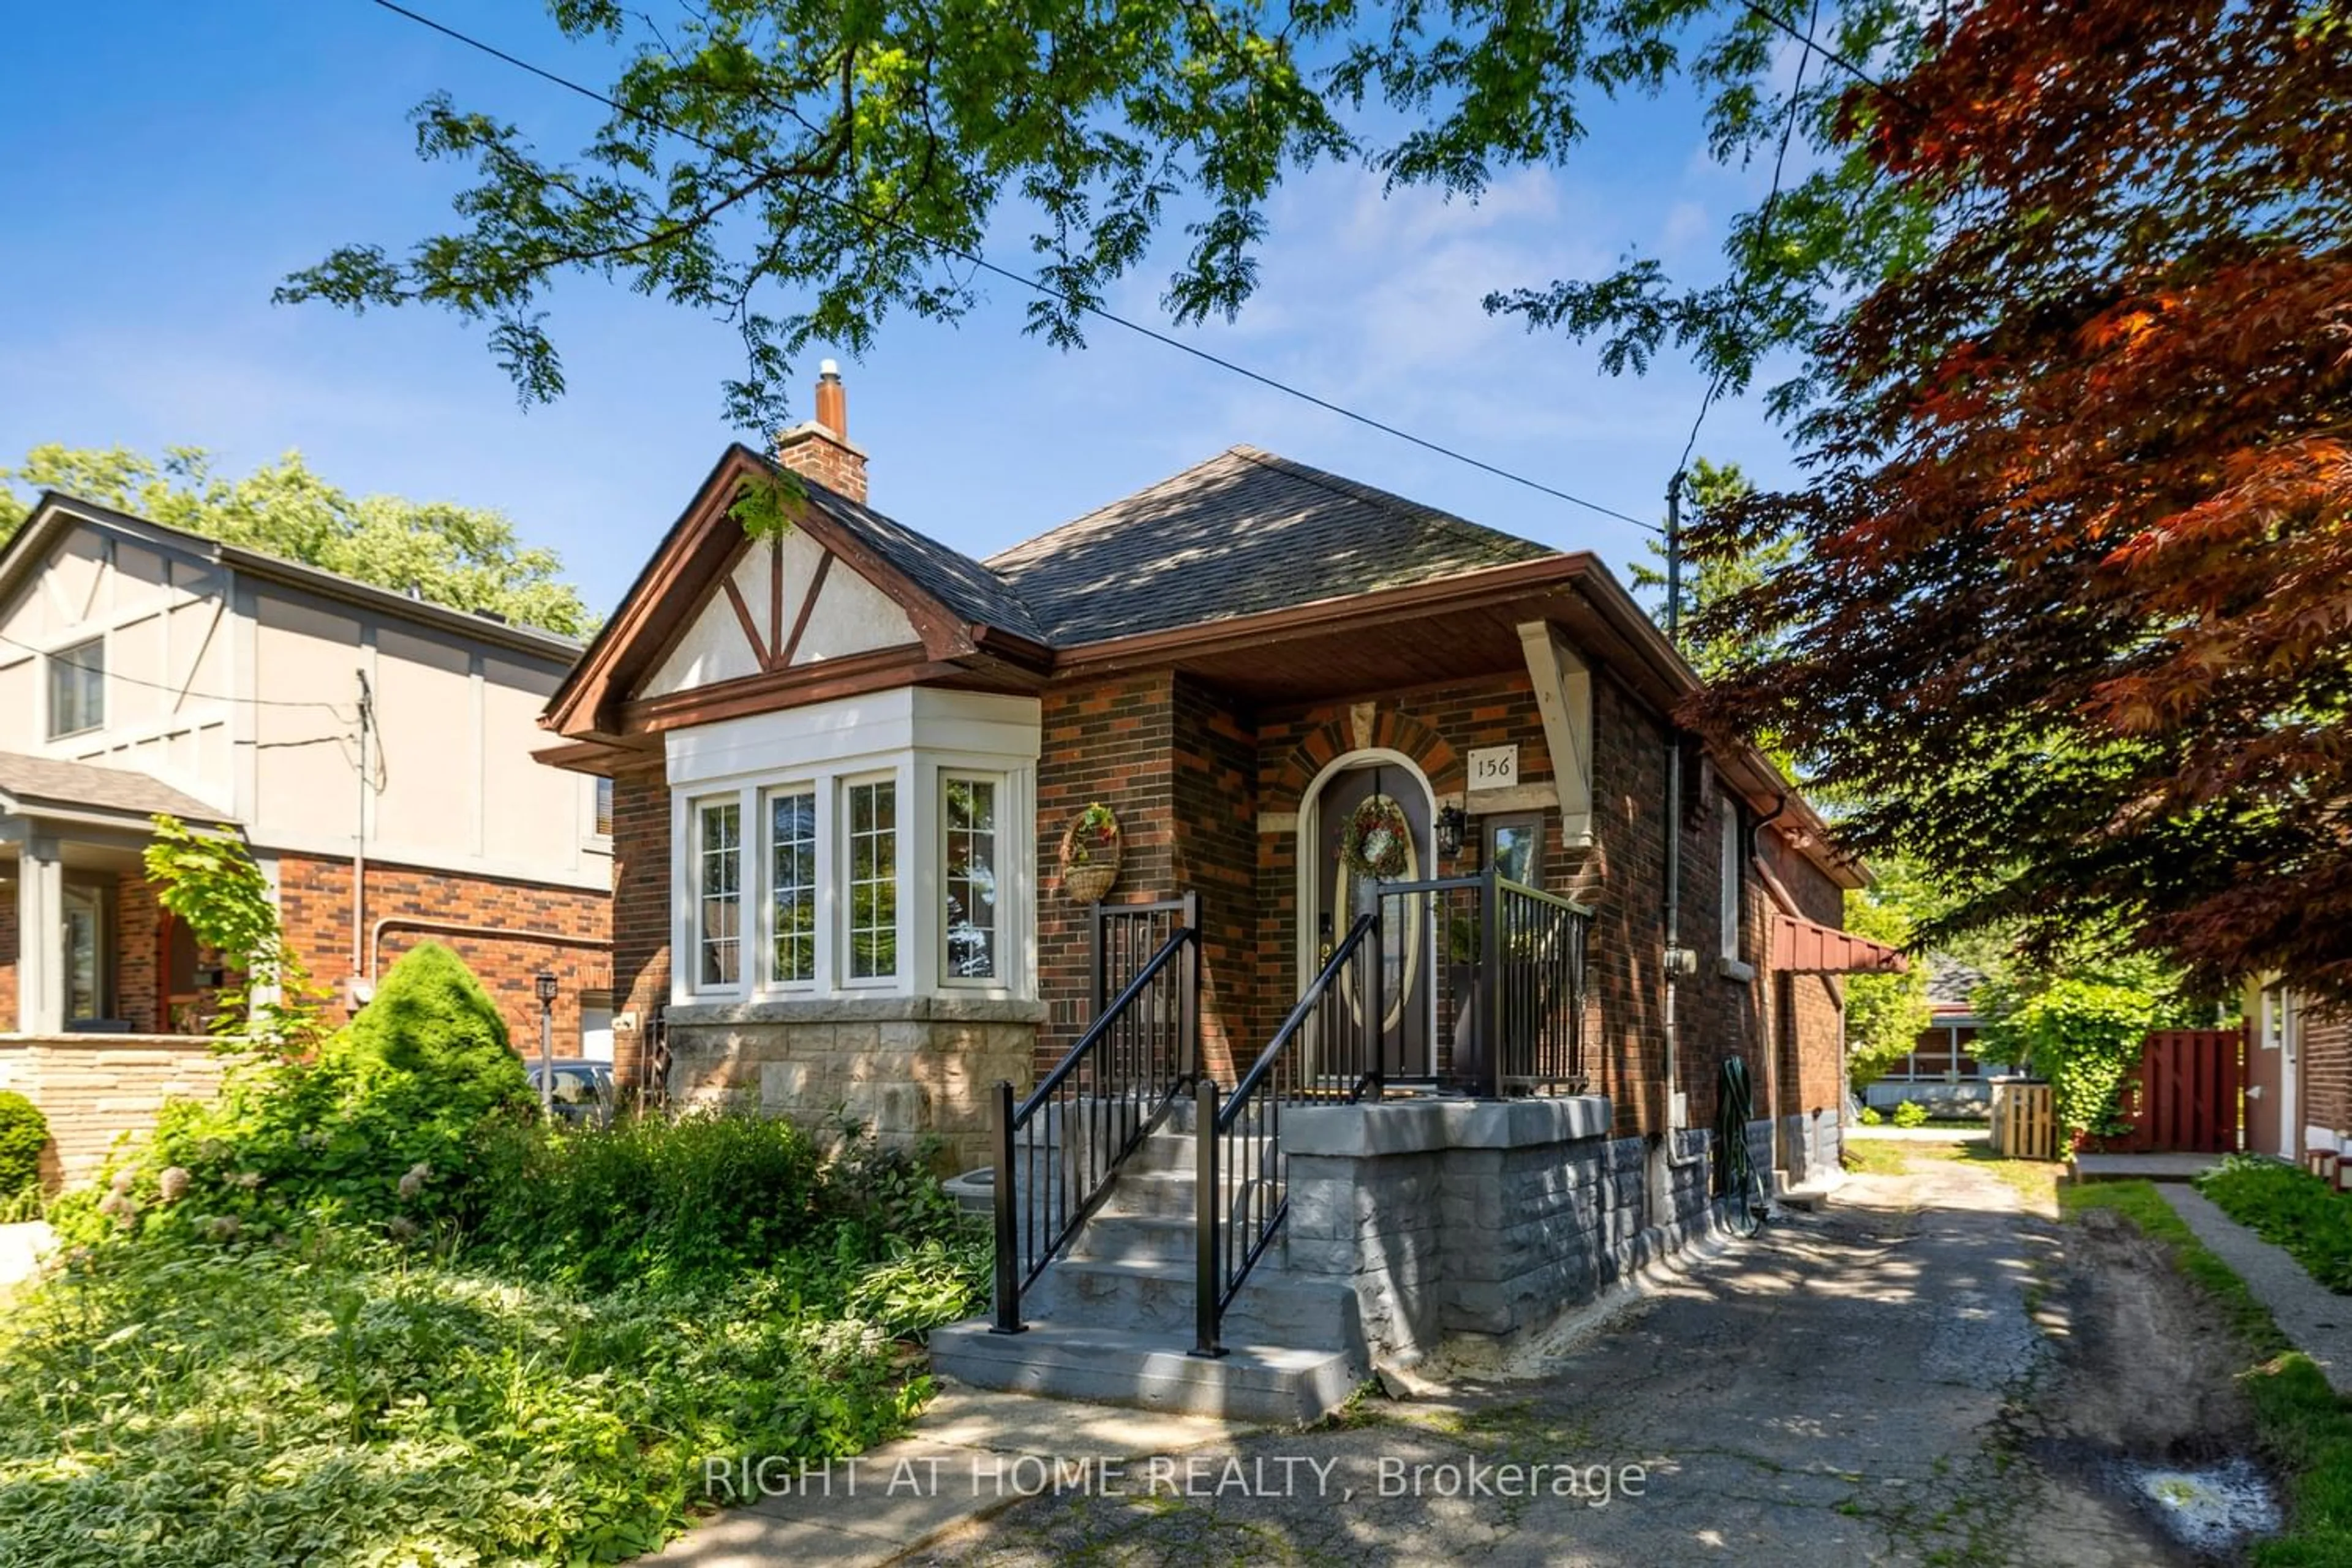 Home with brick exterior material for 156 Longwood Rd, Hamilton Ontario L8S 3V9